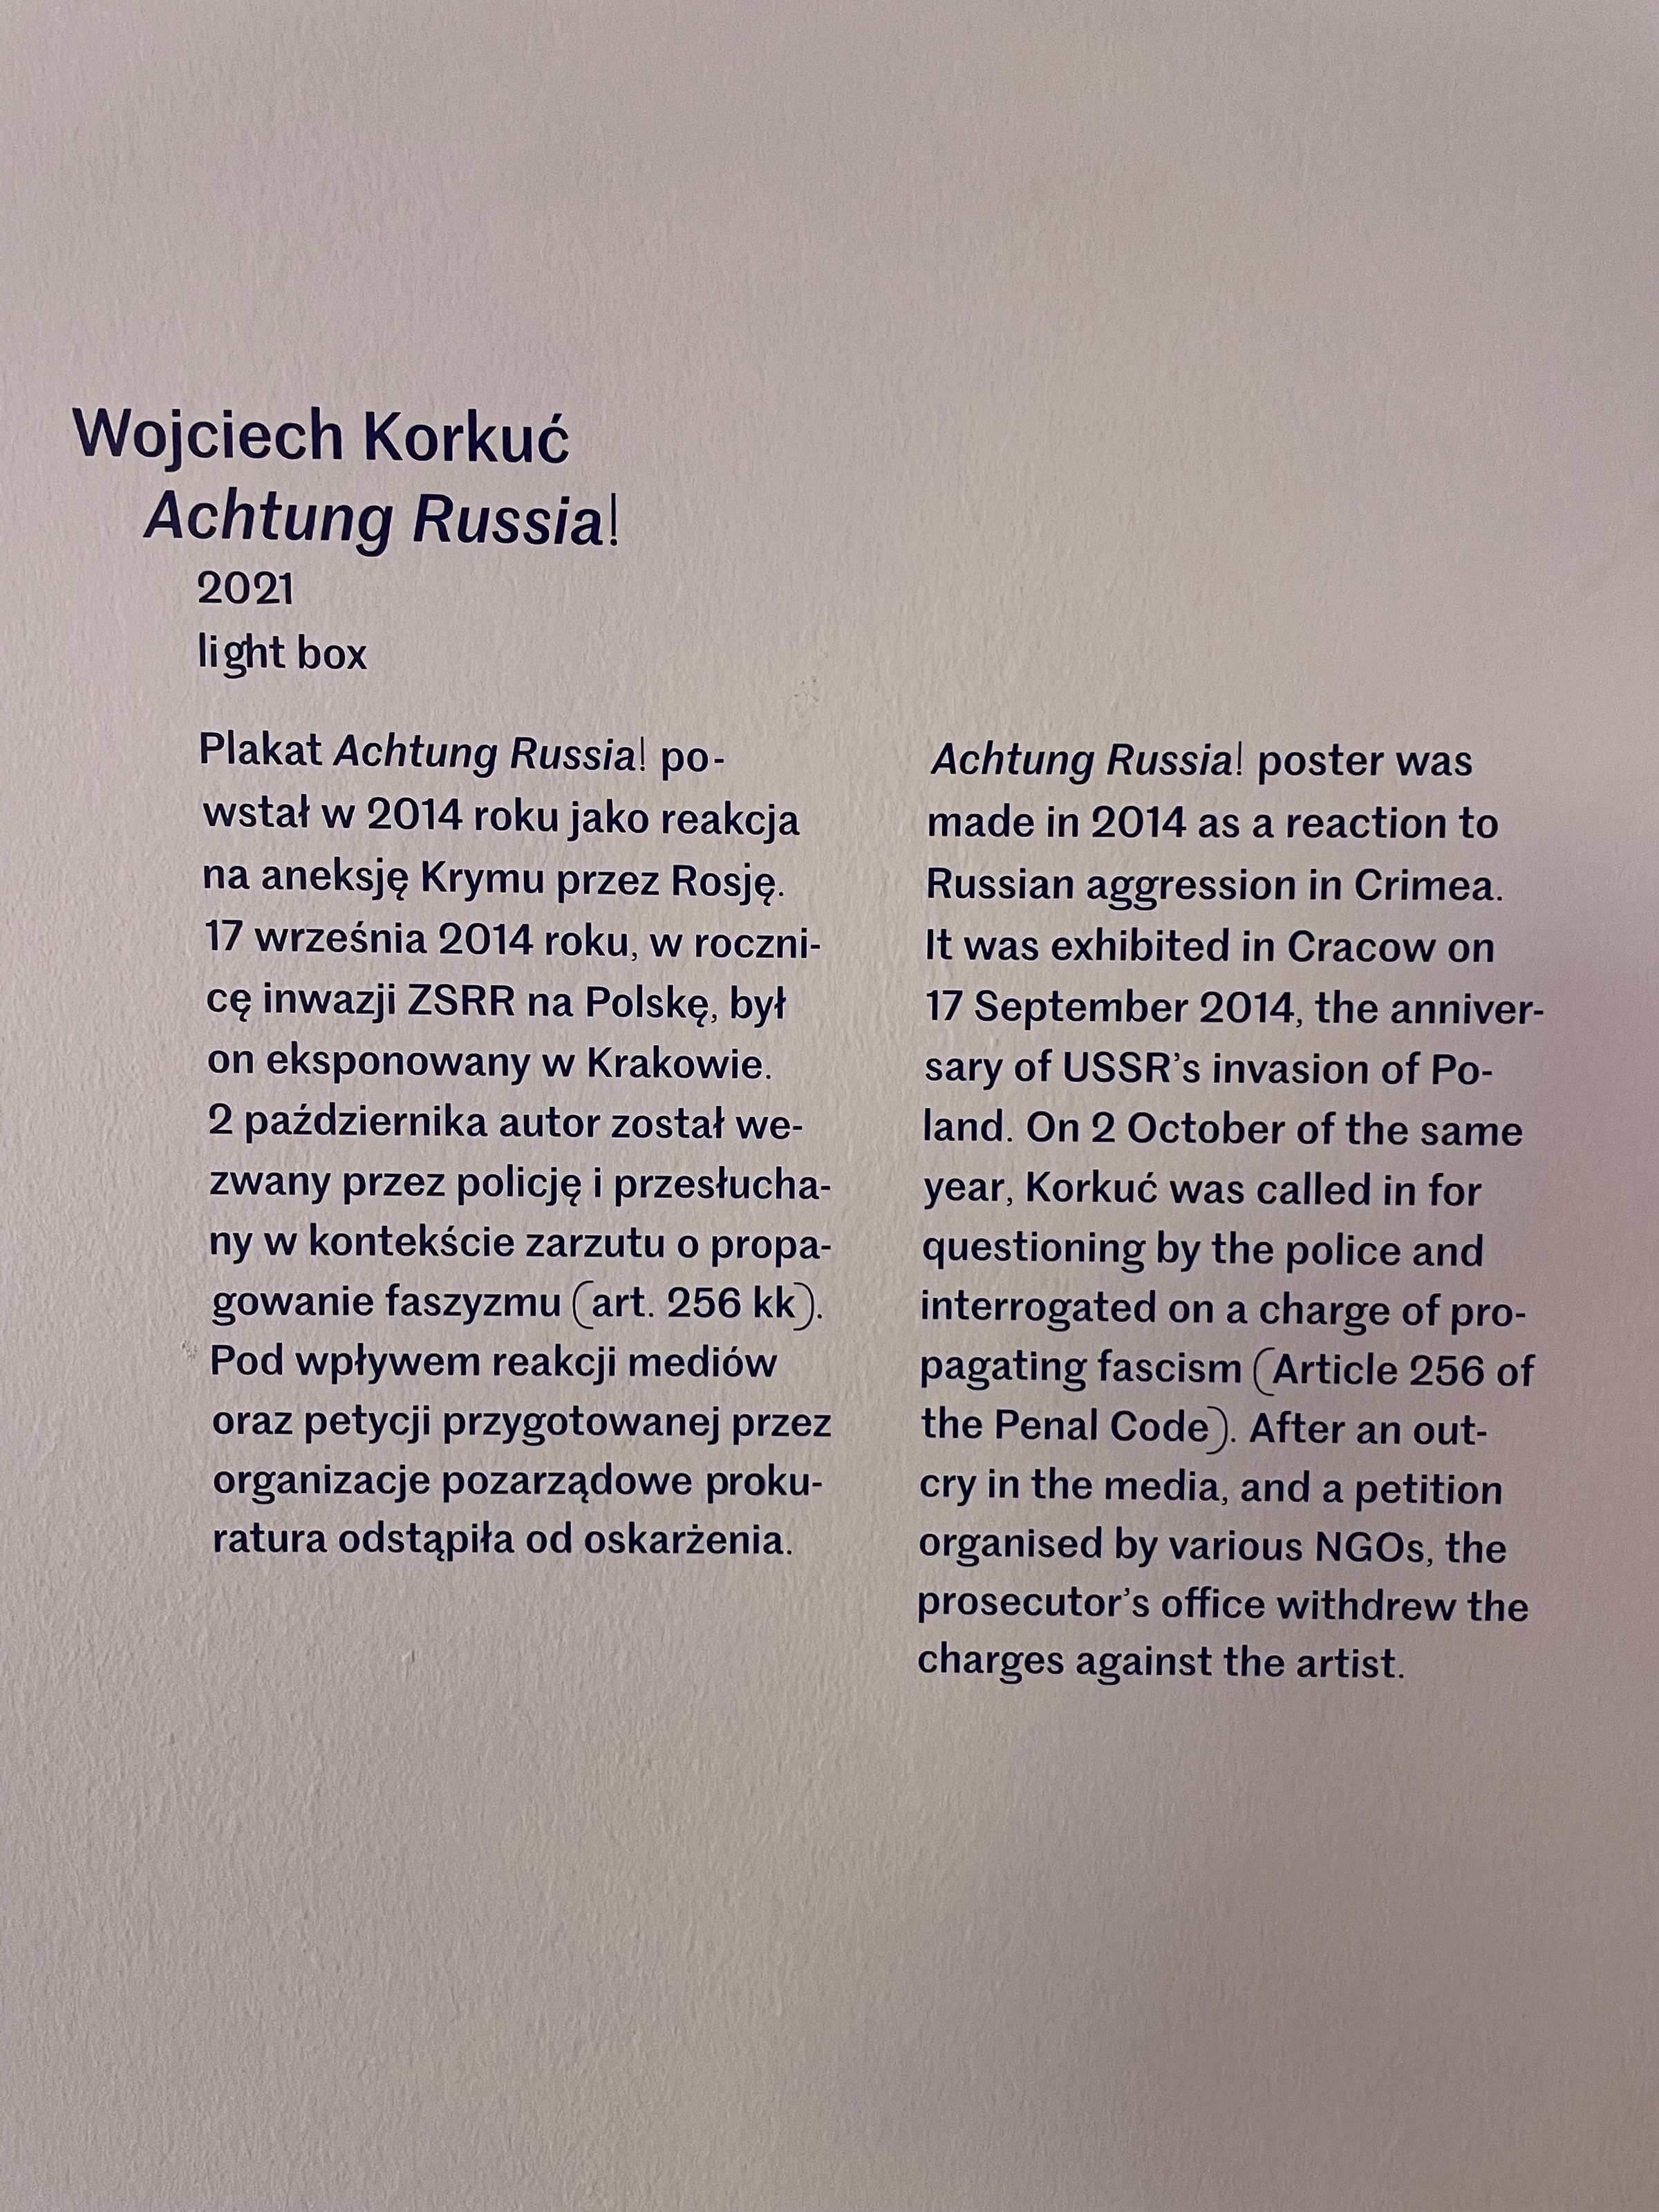 My first visit to Warsaw was to review the Political Art exhibition, where I saw this installation